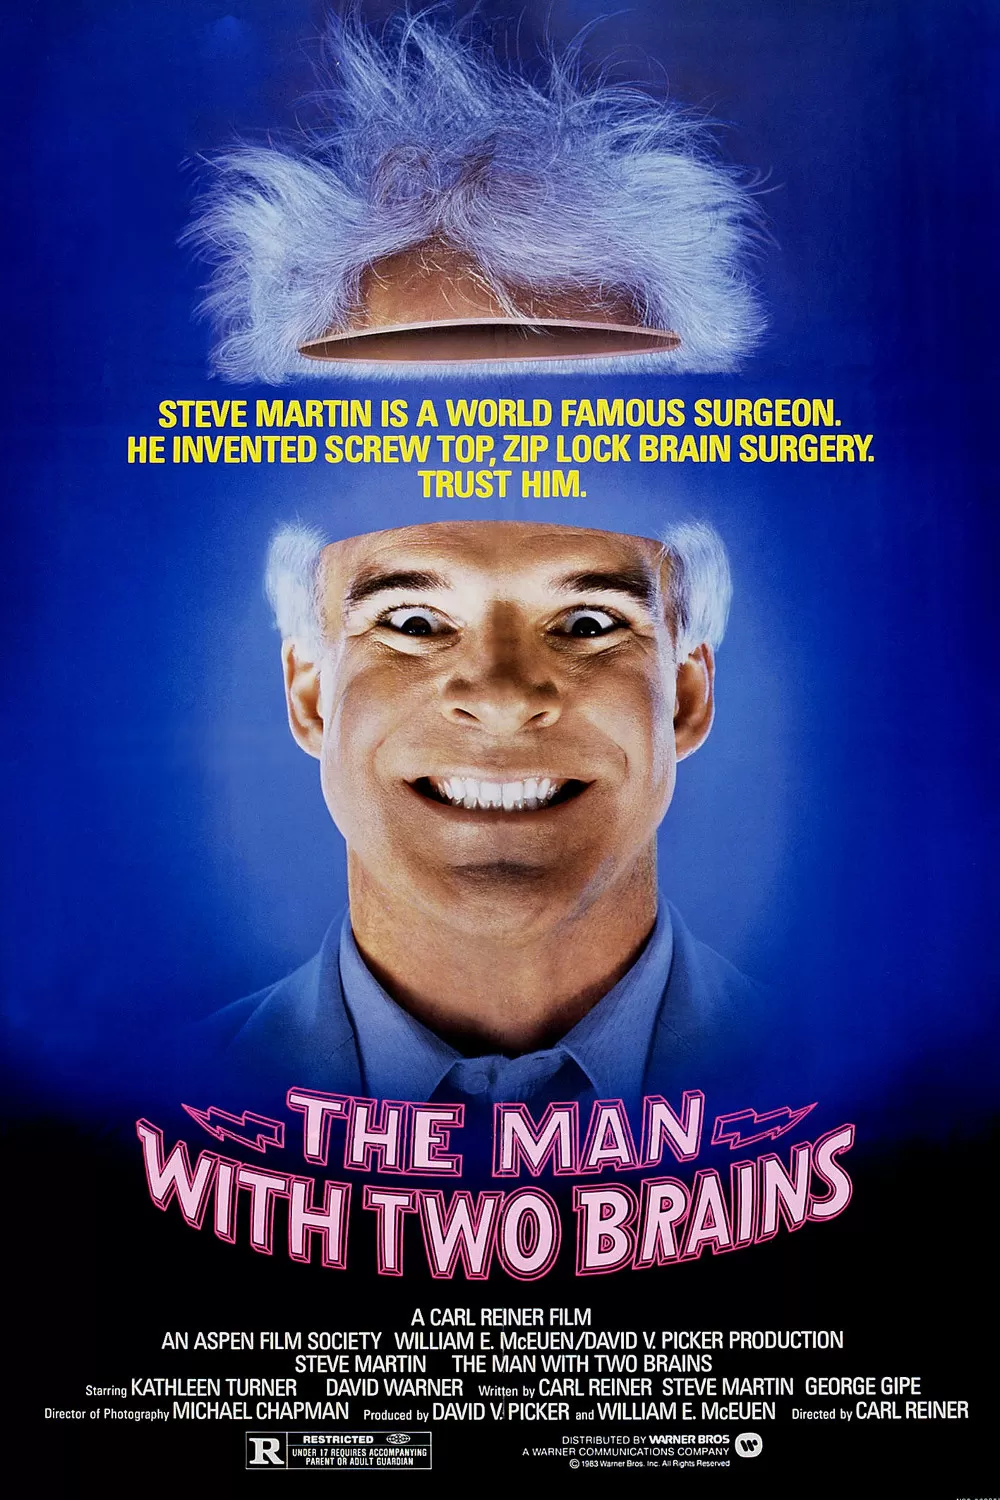 The Man with Two Brains ผู้ชายสมองแฝด